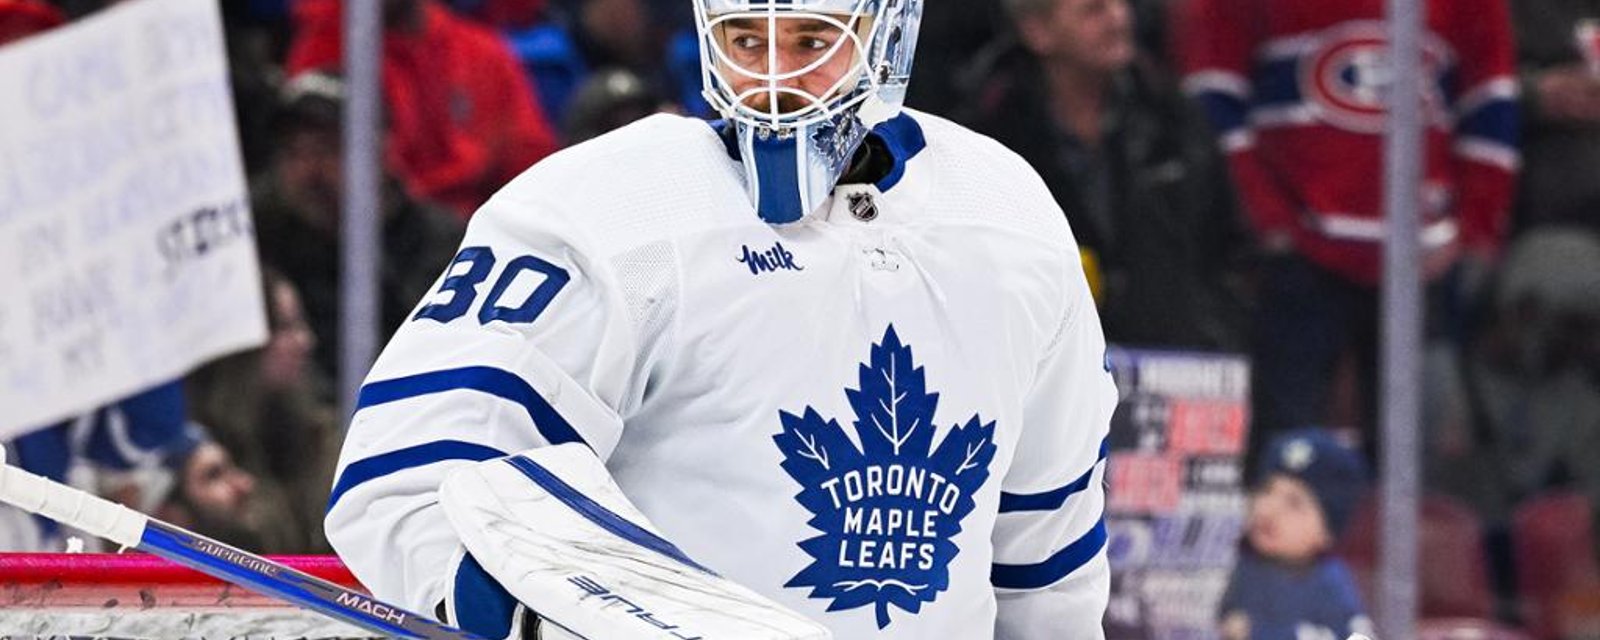 Latest update on theory that Leafs faked Matt Murray’s injury